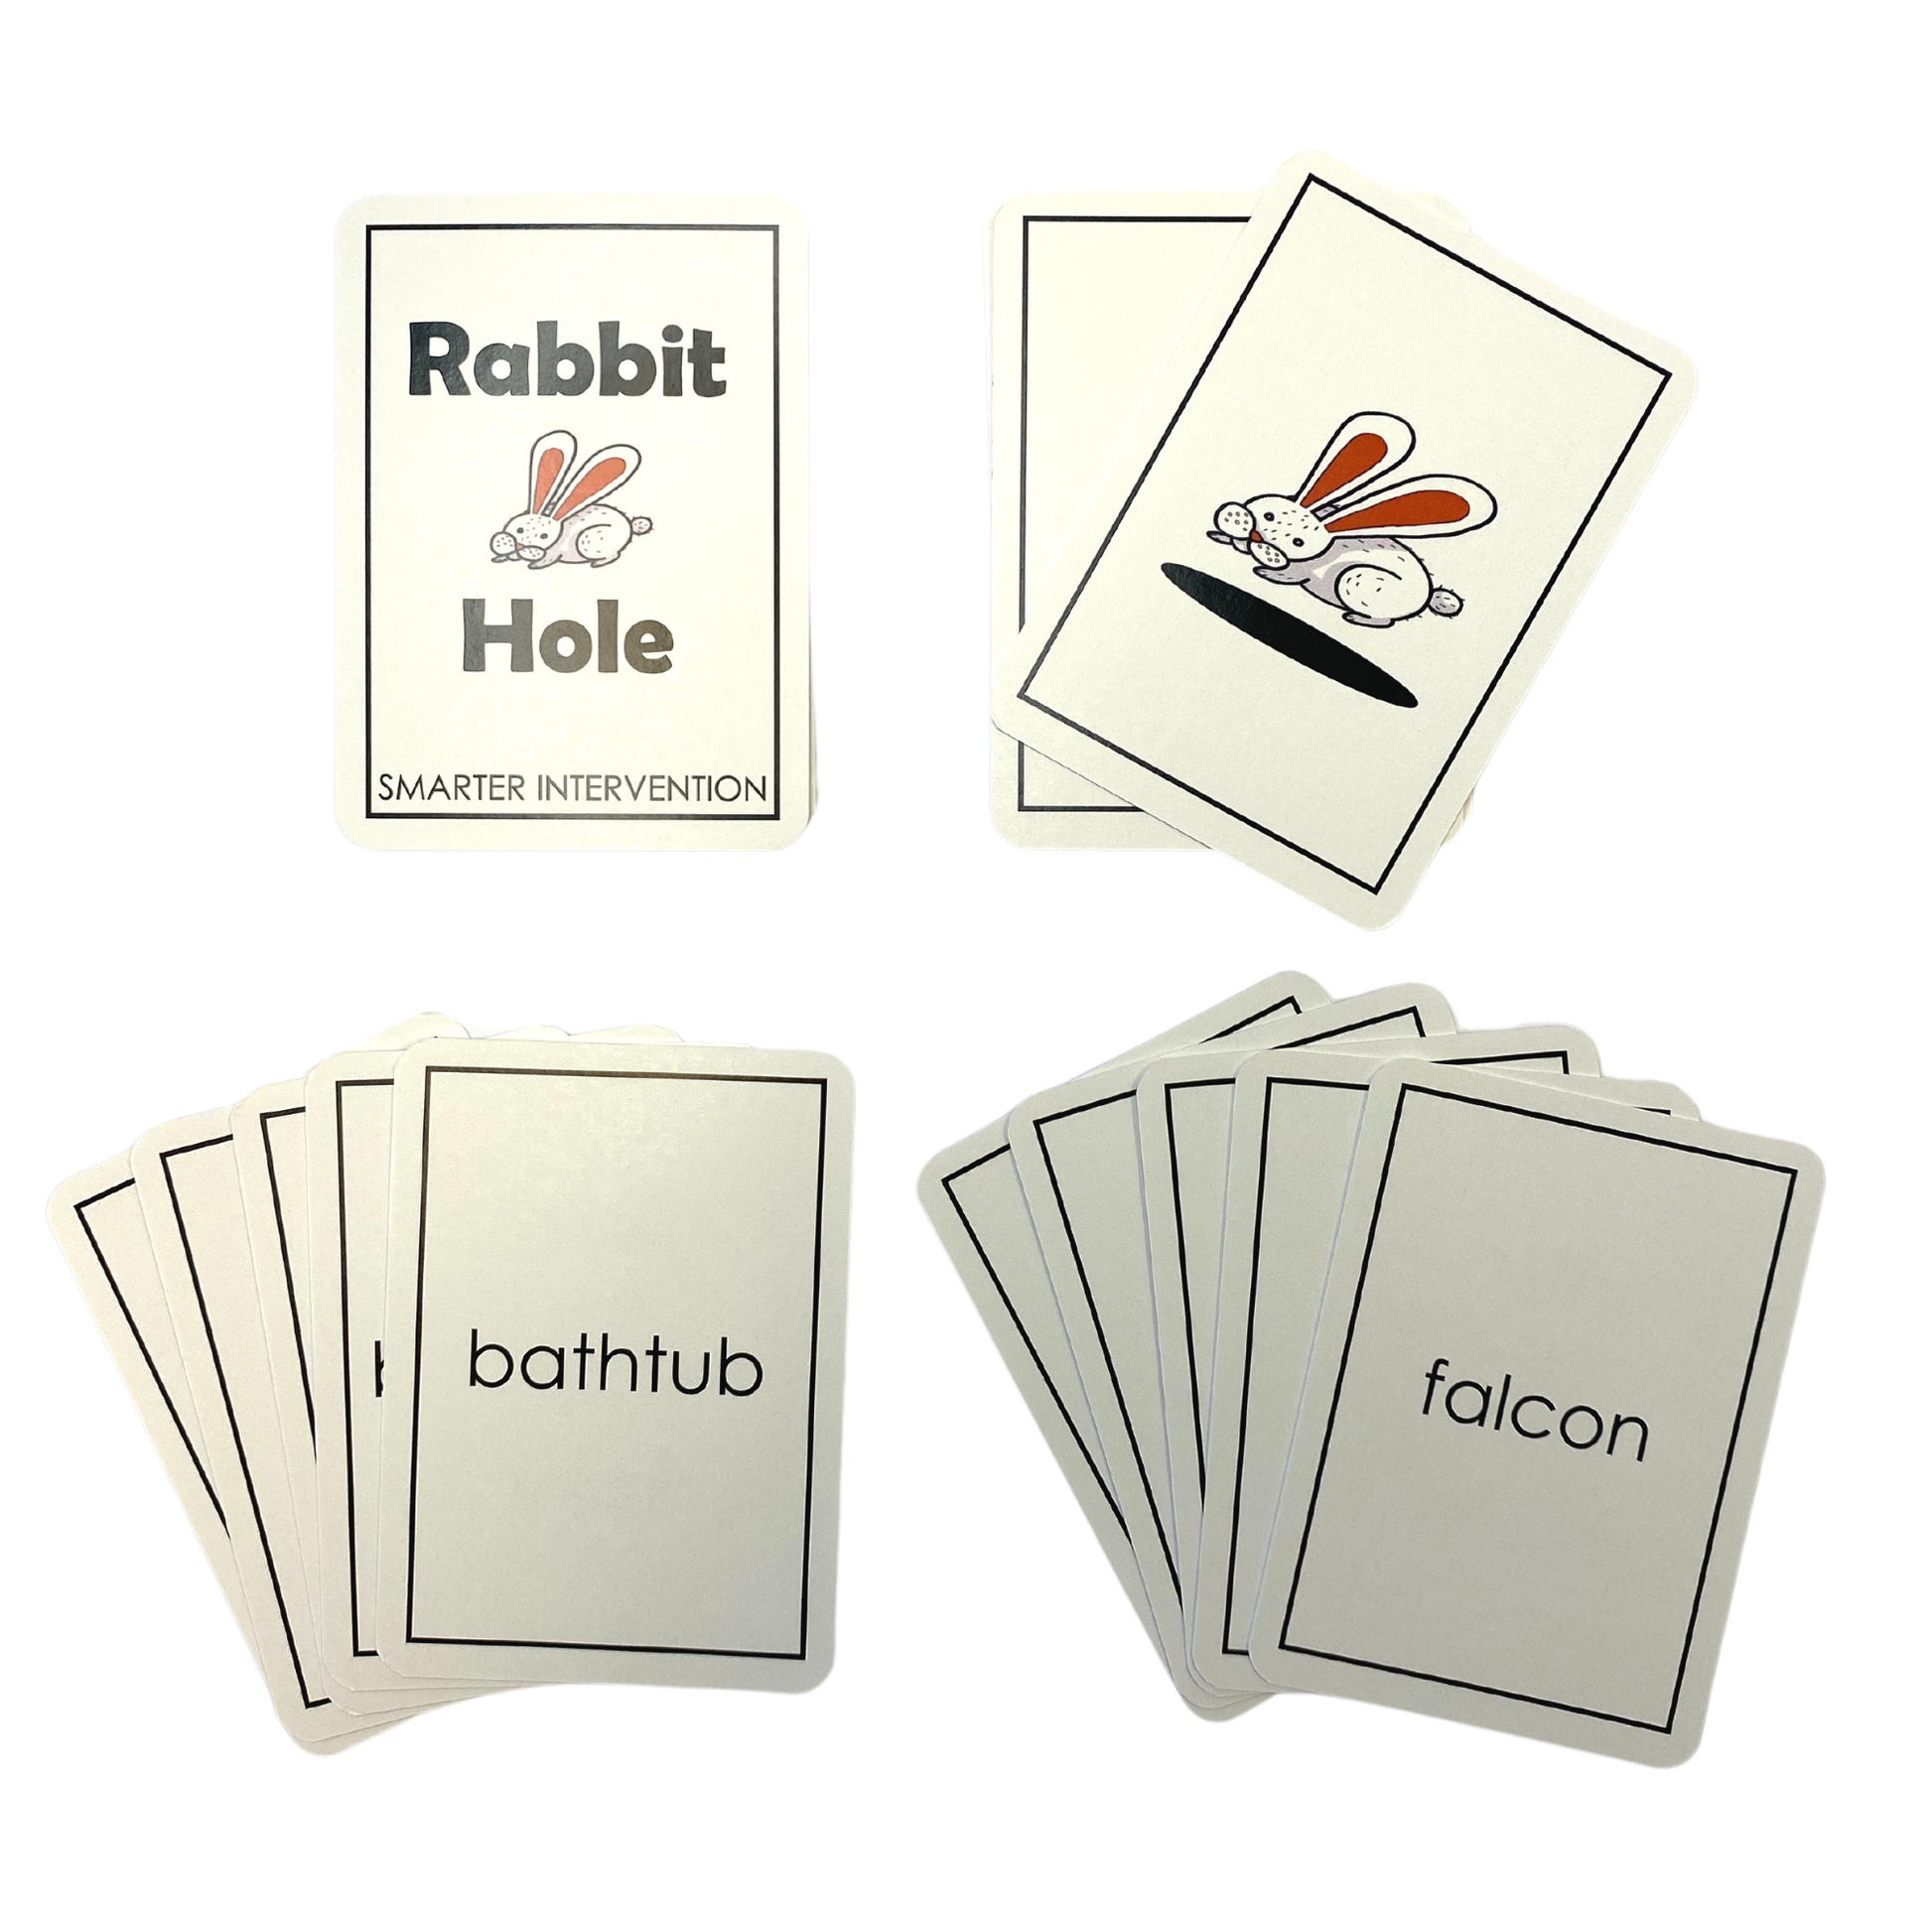 Use the Rabbit Division game cards as a syllable division review drill in small group interventions or as a literacy center activity. This game helps students strengthen their reading skills, build their vocabulary, and improve their comprehension in a fun and interactive way. It is designed to reinforce key concepts in a way that is engaging and memorable.